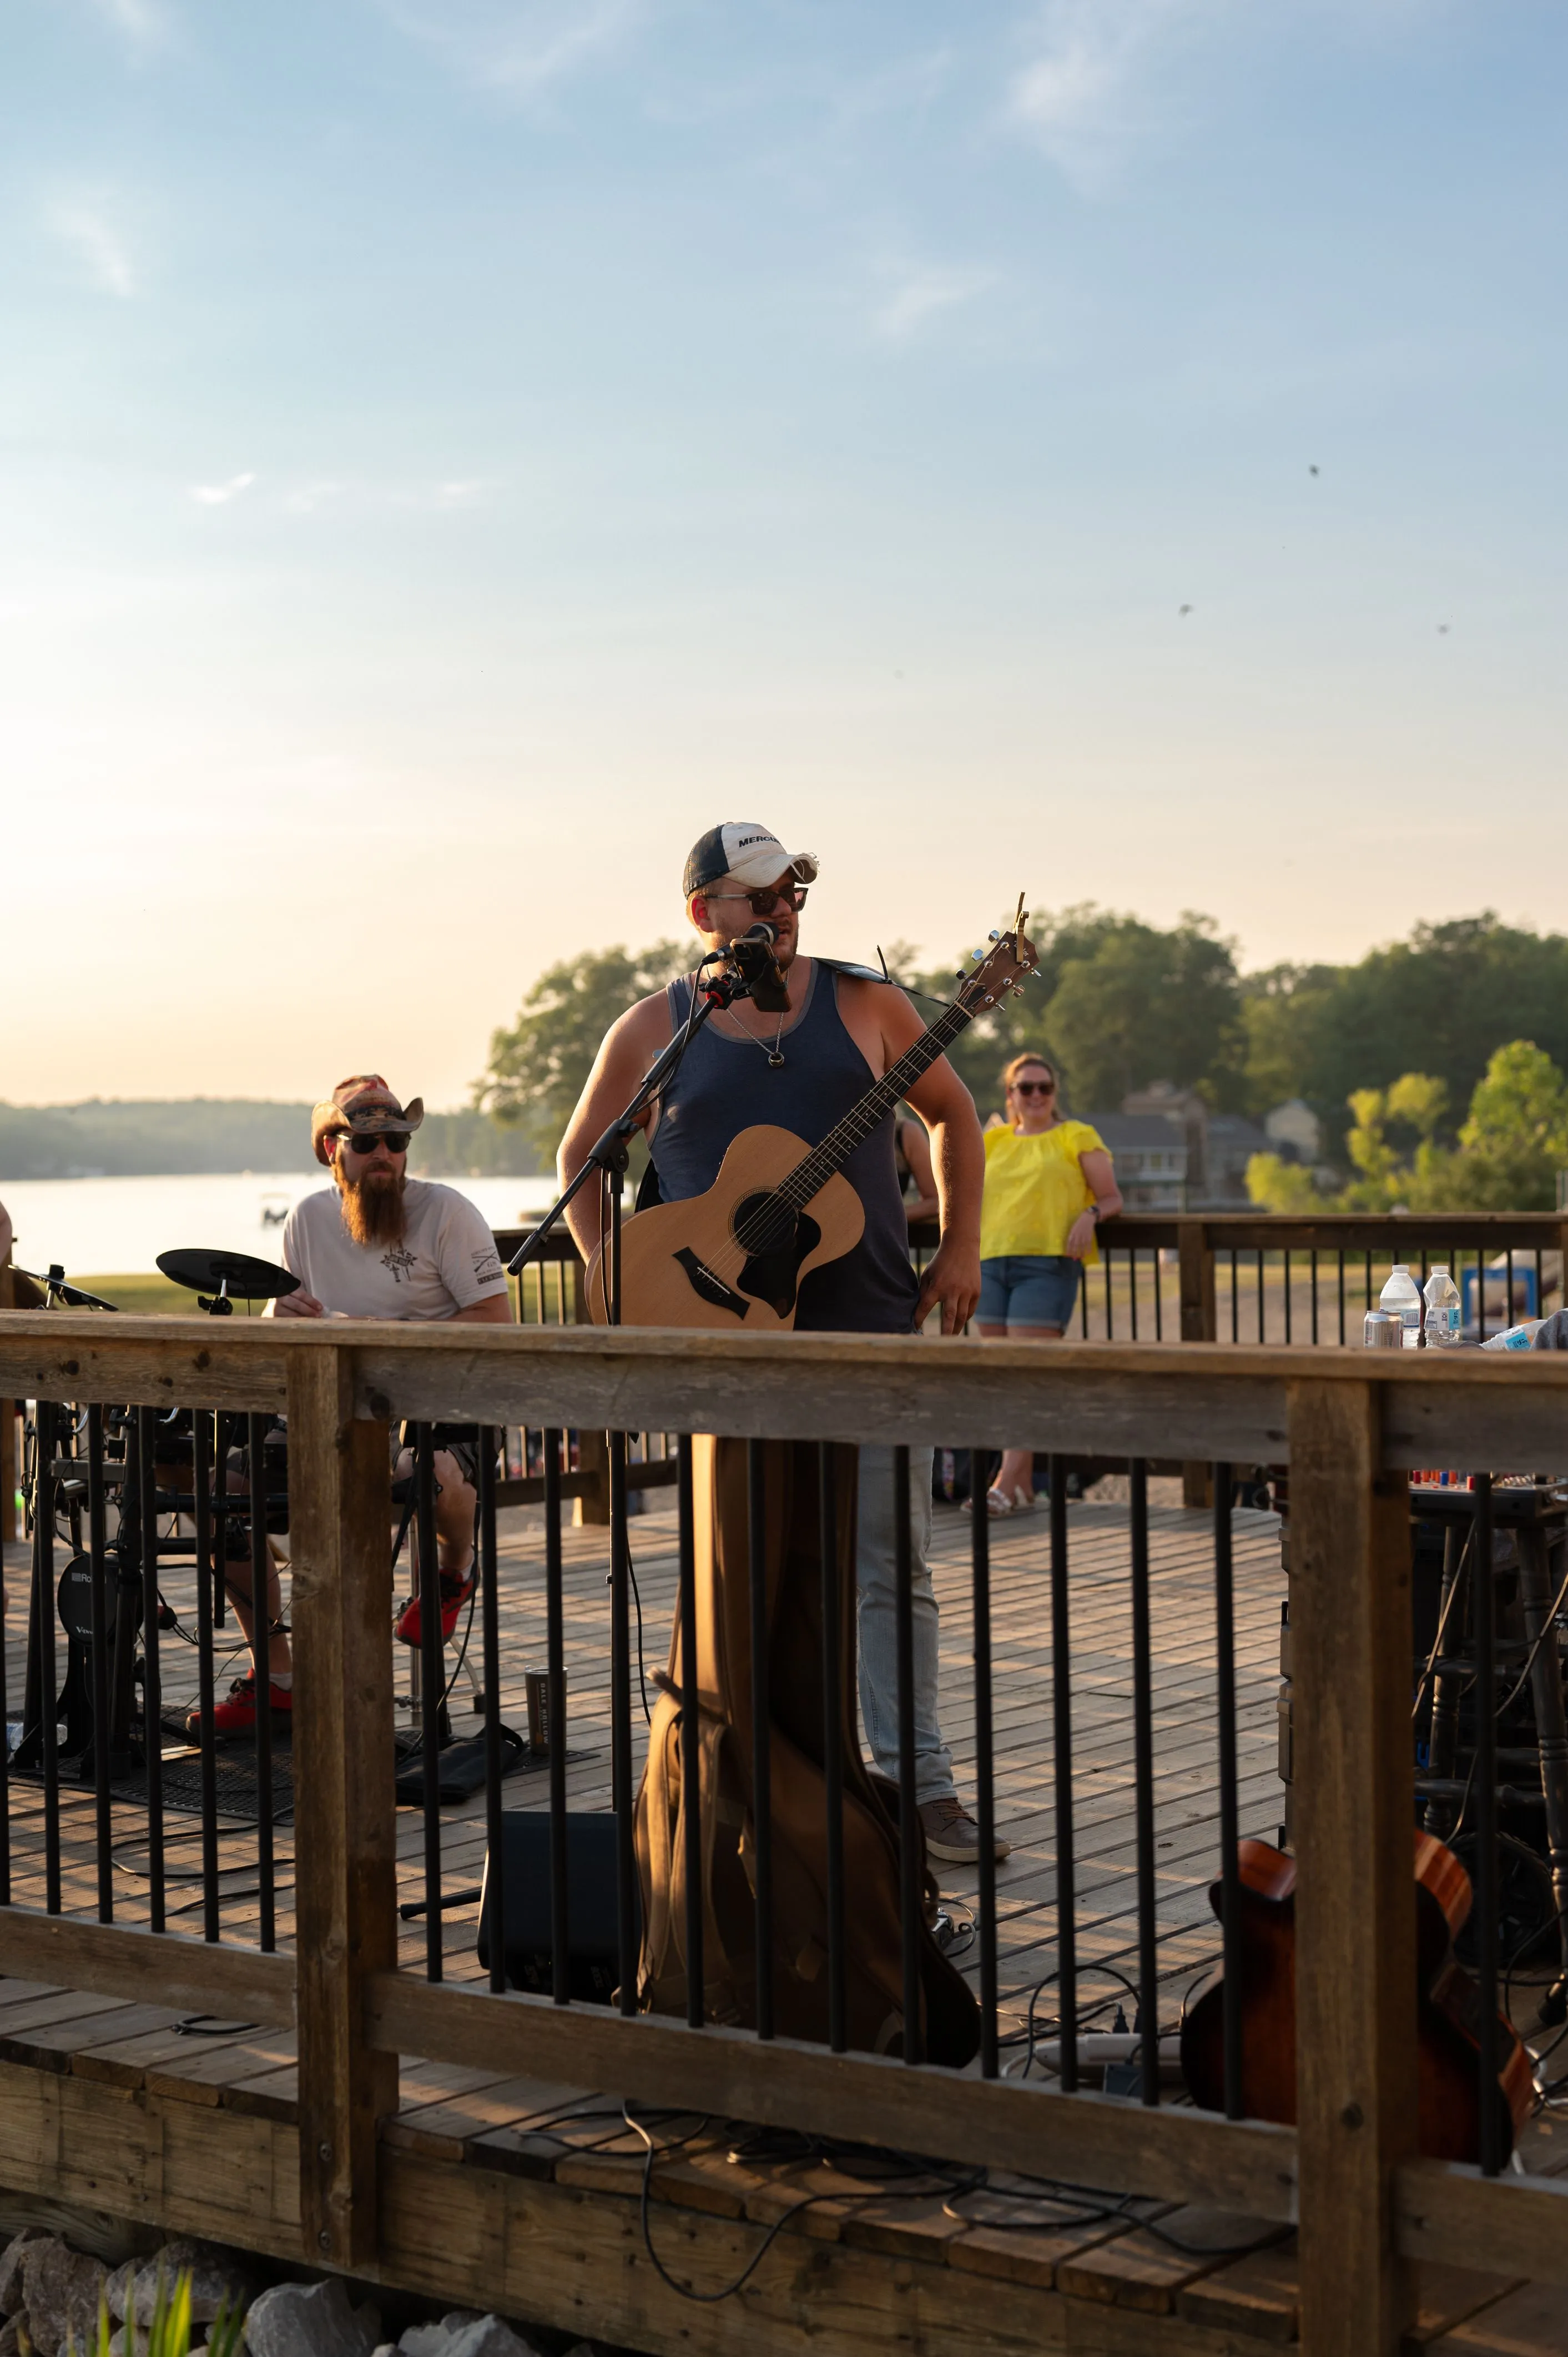 Two musicians performing on a deck by a lake at sunset.